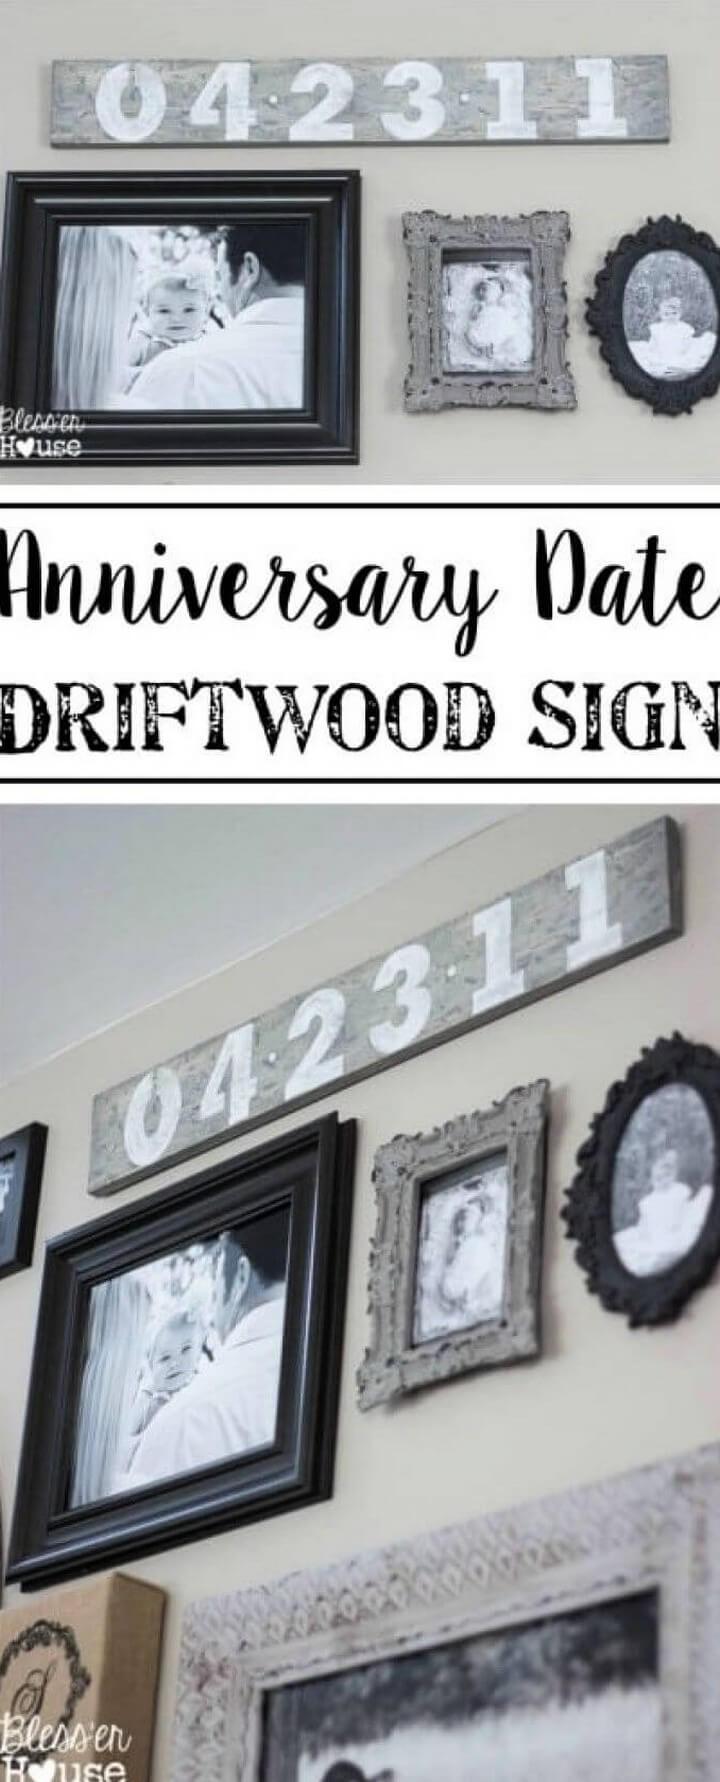 Anniversary Date Driftwood Sign, amazon return pallet, pallet expander, pallet standard size, pallet project, wood pallet fortnite, recycled pallet, chep pallet, pallet taste, dimensions of a pallet, pallet dimensions, pallet recycling near me, cleft lip and pallet, pallet definition, pallet company near me, pallet company, standard pallet dimensions, spring color pallet, red color pallet, pallet chicken coop, how many square feet in a pallet of sod, pallet wholesale near me, pallet liquidation near me, pallet suppliers, how to take pallet apart, what is a pallet, pallet compost bin, used pallet rack near me, wooden pallet recycling near me, wood pallet recyclers near me, amazon customer return pallet, how to build a free standing pallet wall, how big is a pallet, pallet meaning, roxanne pallet, pallet auction near me, pallet pickup, build a pallet, pallet building, manufacturing pallet, how many bags in a pallet of mulch, how many bags of mulch on a pallet, how many brick in a pallet, paint and pallet, pallet express, northwest pallet, wooden pallet locations fortnite, how much does a pallet weigh, electronics by the pallet, pallet sales near me, pallet fence idea, pallet supply near me, average pallet size, pallet diy couch, pallet of sod weight, how to disassemble pallet, pallet vs skid, palette vs pallet, stain for pallet wood, pallet benches diy, pallet counters, pallet disposal, how many pieces of sod in a pallet, how to use a pallet jack, pallet calculation, pallet consultants, material design color pallet, diy pallet patio furniture, sod pallet coverage, pallet disposal near me, how to build pallet shed, pallet manufacturers near me, american pallet liquidators, what is the size of a standard pallet, pallet service, 70 diy pallet ideas, how much does a pallet of sod cover, amazon customer returns electronics pallet, standard pallet weight, standard weight of a pallet, how many bags of concrete in a pallet, scrap and pallet man, pallet salt lake city, nazareth pallet, diy wood pallet project, how to make a pallet sign, pallet jack repair near me, halloween pallet ideas, pallet parties, pallet party, dominique cosmetics lemonade pallet, height of a pallet, pallet height, michigan pallet, how many square feet does a pallet of sod cover, pallet on the floor, the perfect pallet, art pallet clipart, pallet height standard, square feet in a pallet of sod, what is pallet jack,